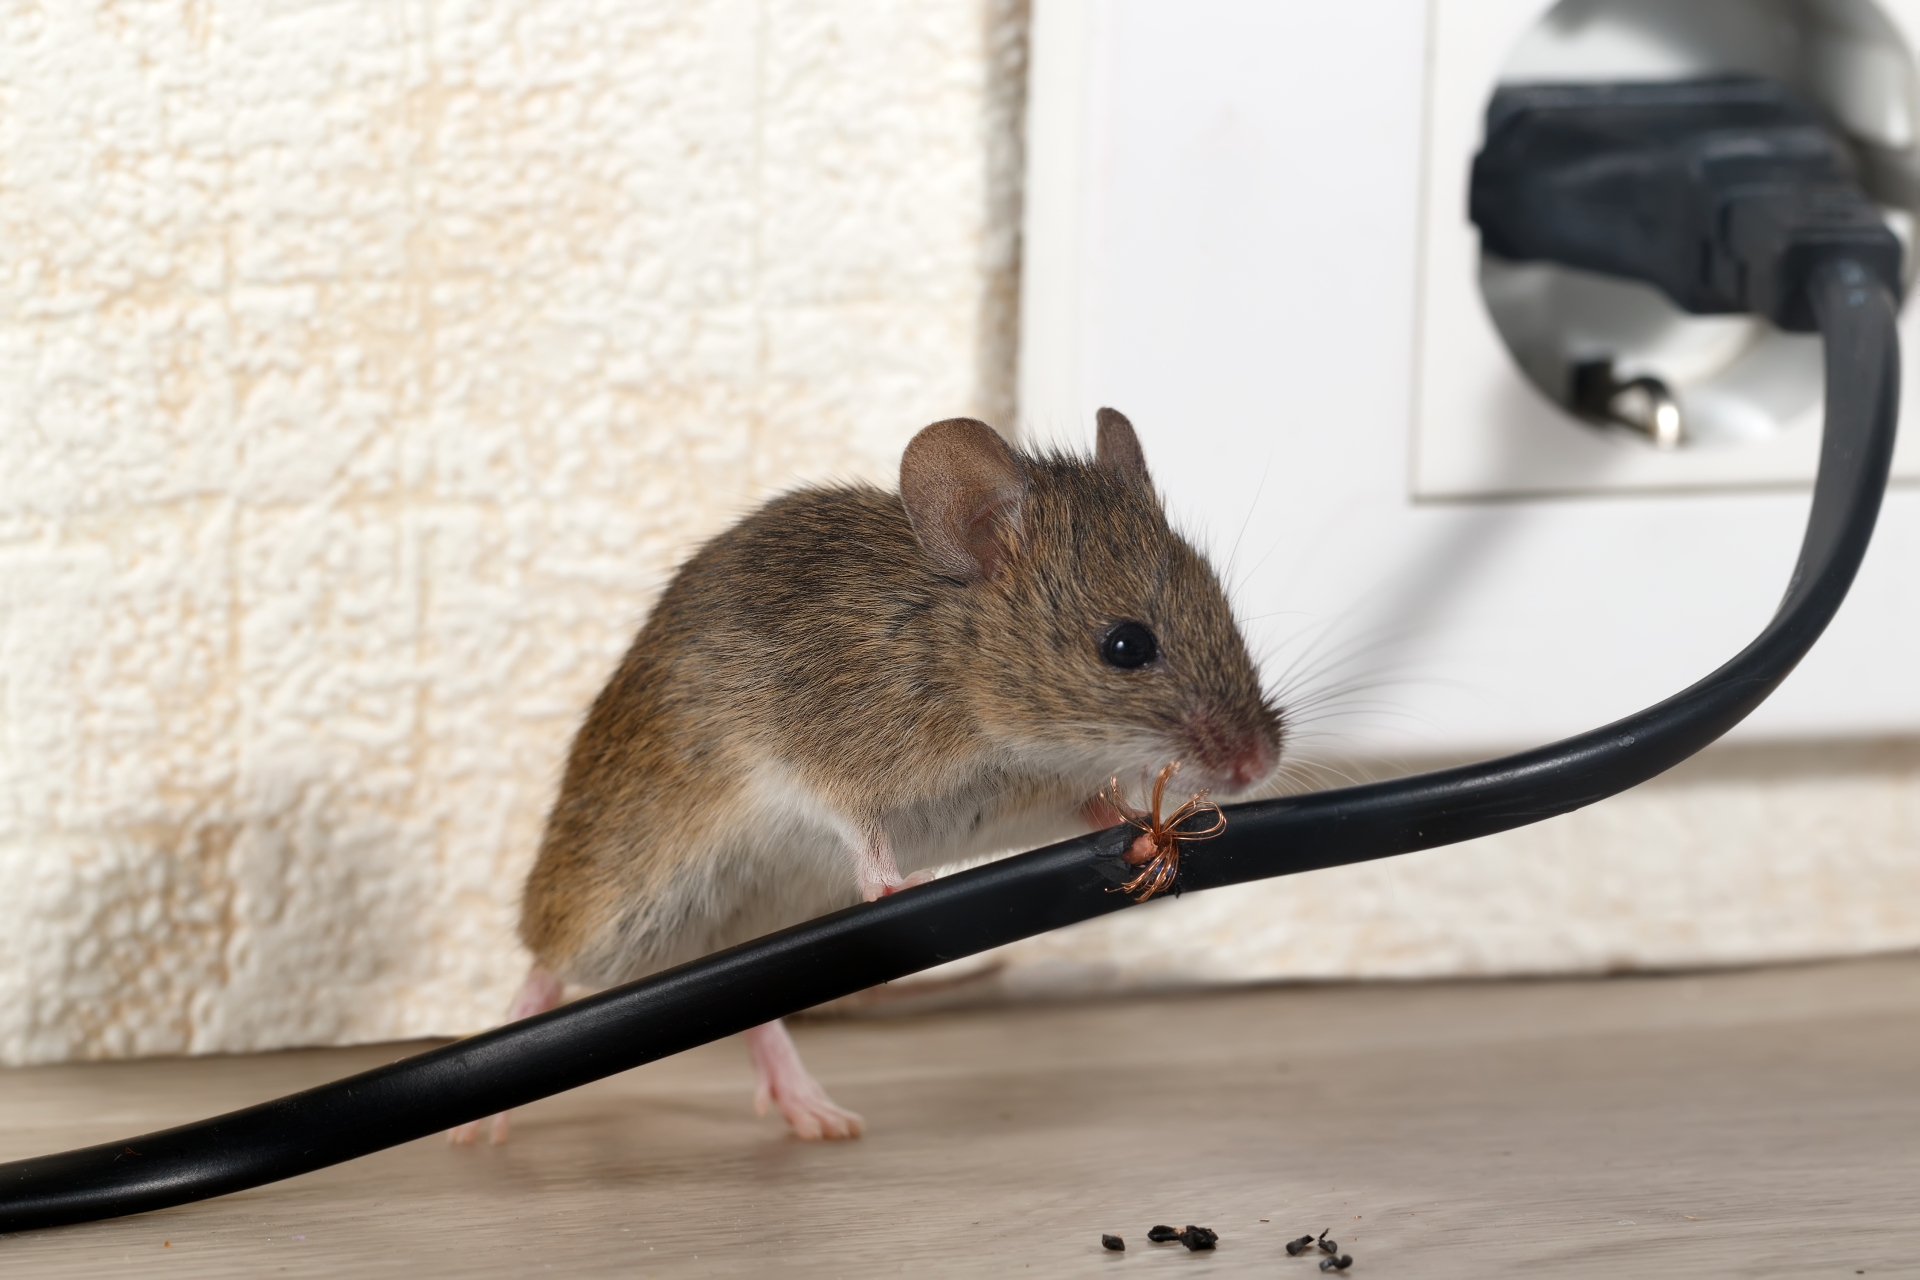 Mice Infestation, Pest Control in North Feltham, East Bedfont, TW14. Call Now 020 8166 9746